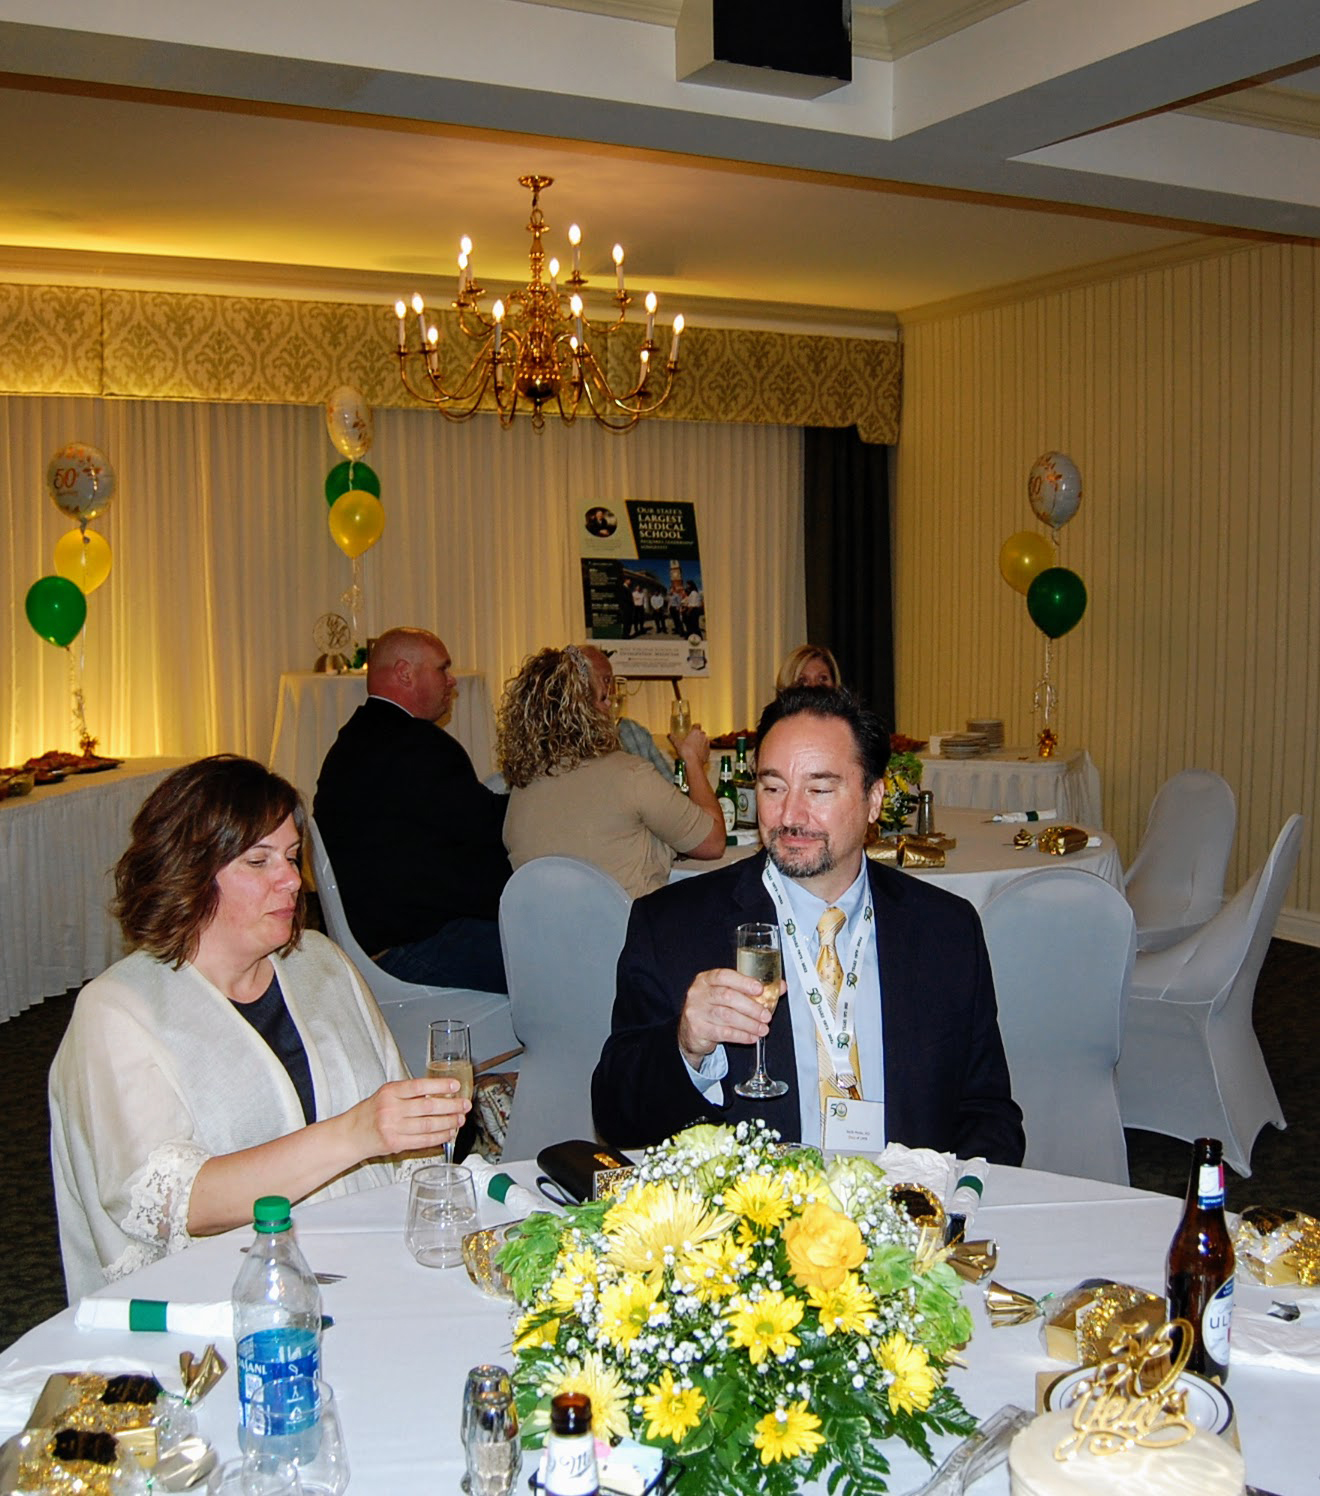 Man and woman appear to be starting a champagne toast, another table can be seen in the background also holding up glasses